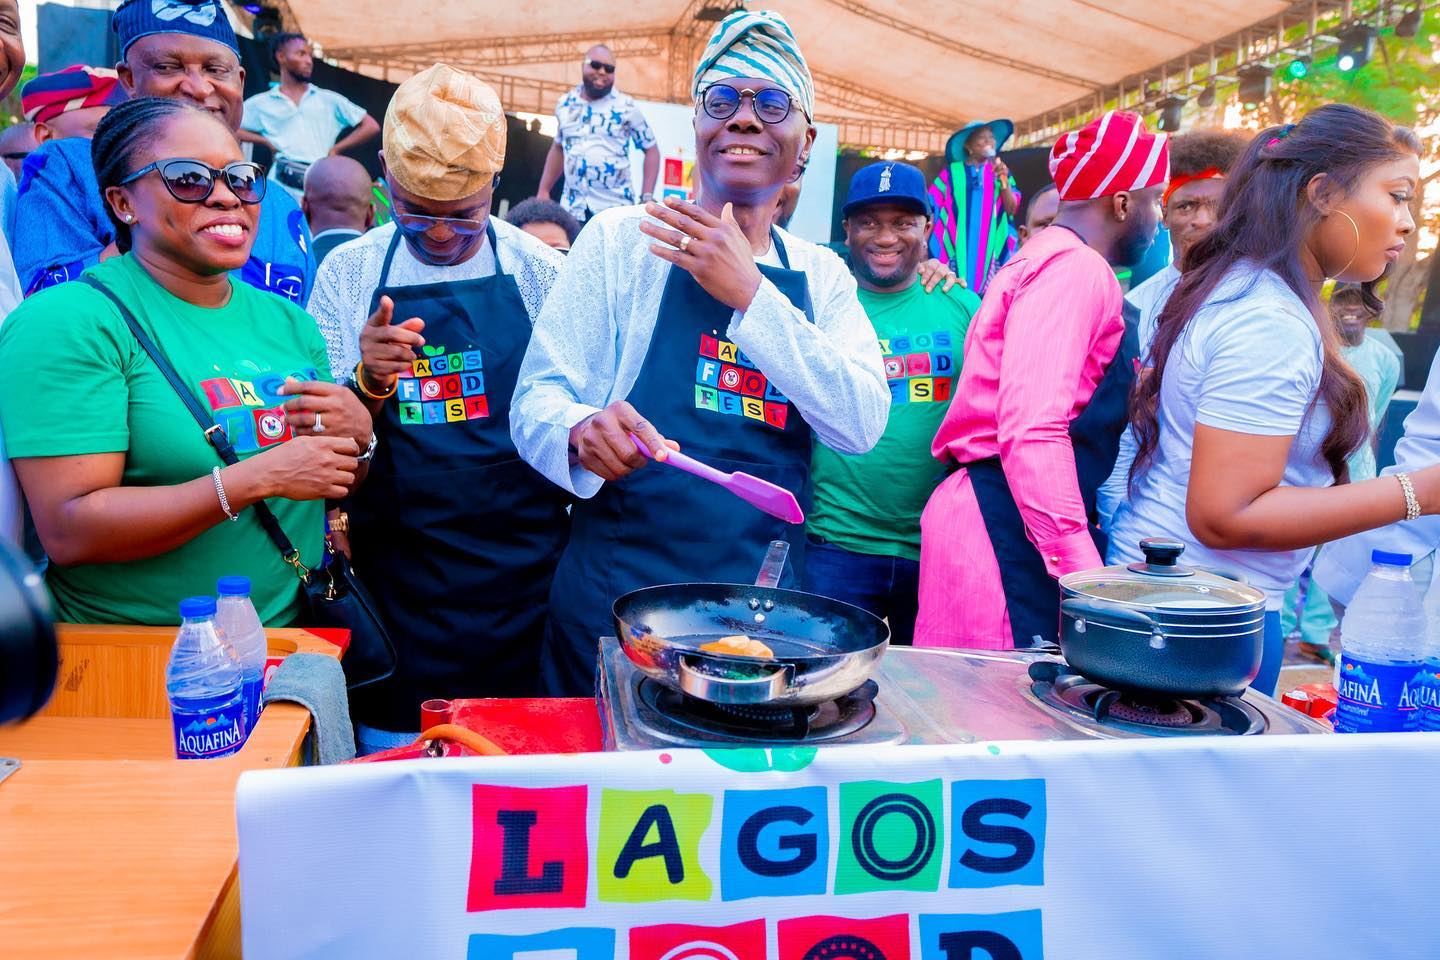 Gov. Babajide Sanwo-Olu joins chefs in the 2022 Lagos food festival to prepare fish pepper soup to the delight of participants at the event.